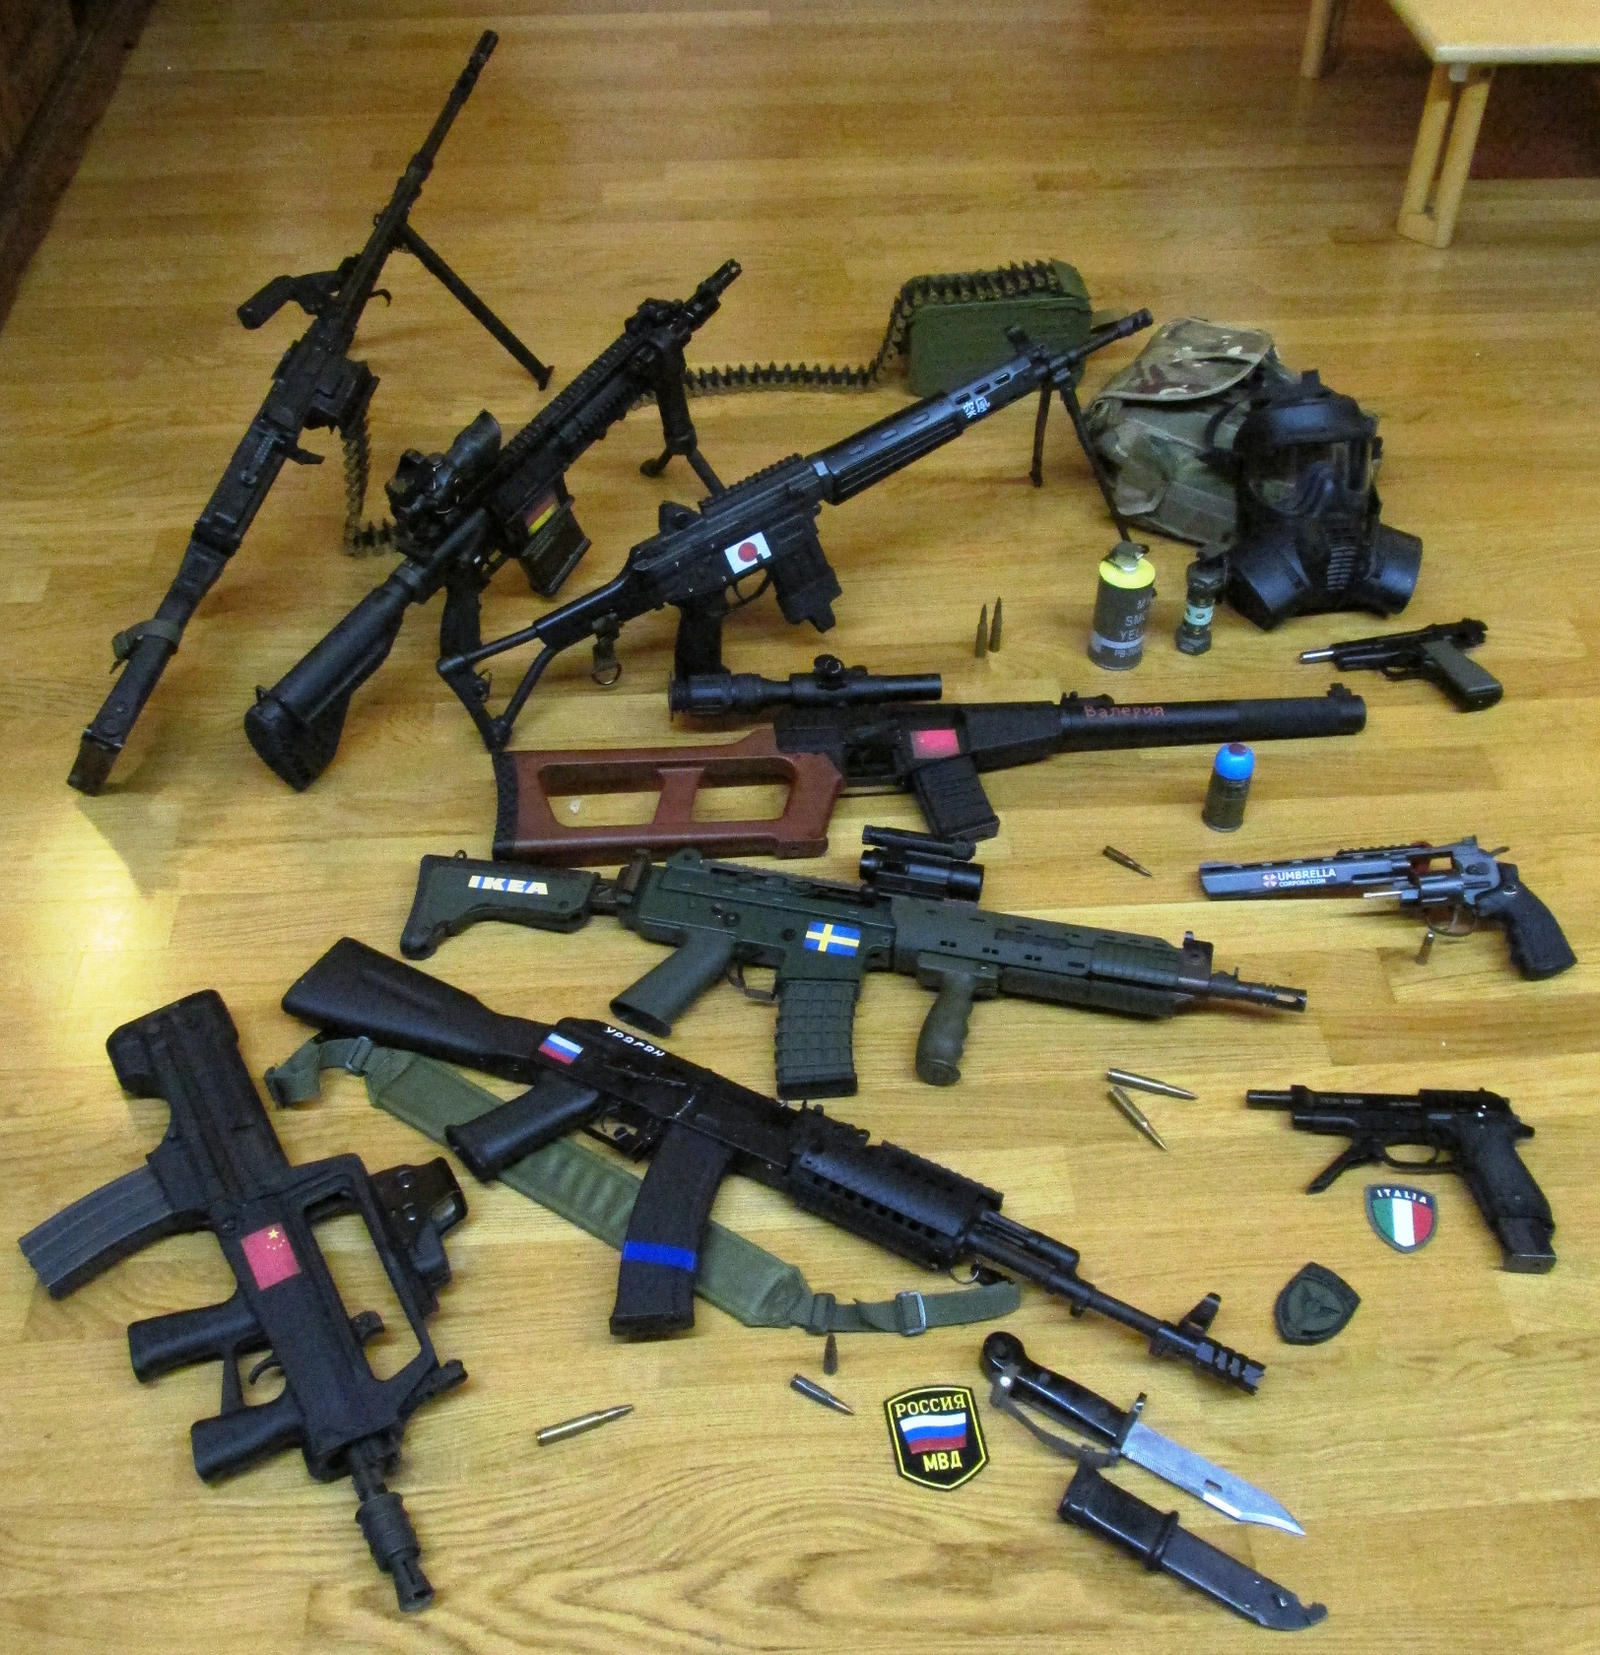 My entire arsenal of airsoft guns and gear